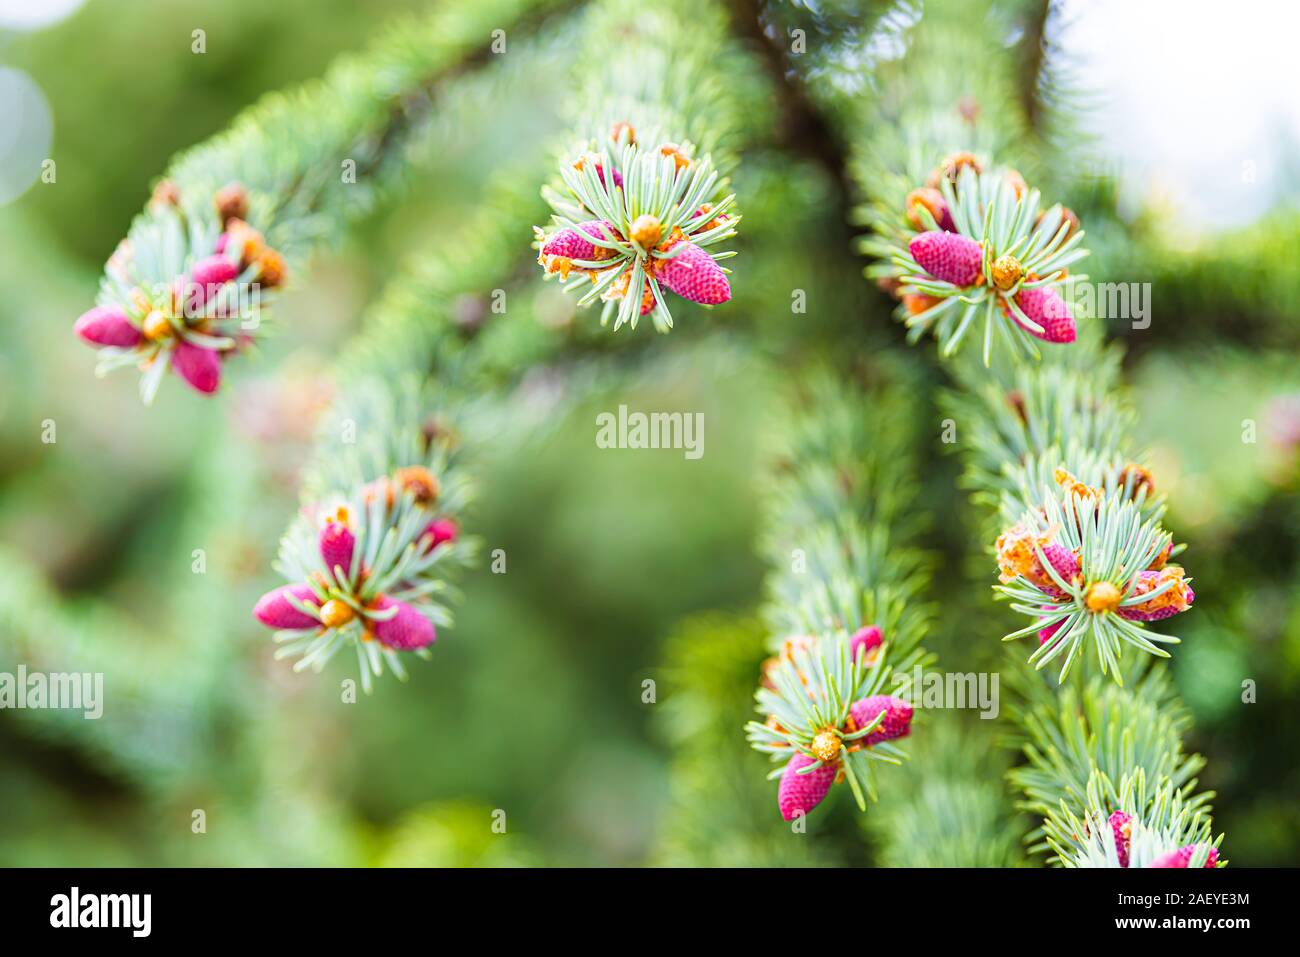 Crested Butte, Colorado in summer with macro closeup low angle view of pine tree with small young pink red cones in downtown village Stock Photo